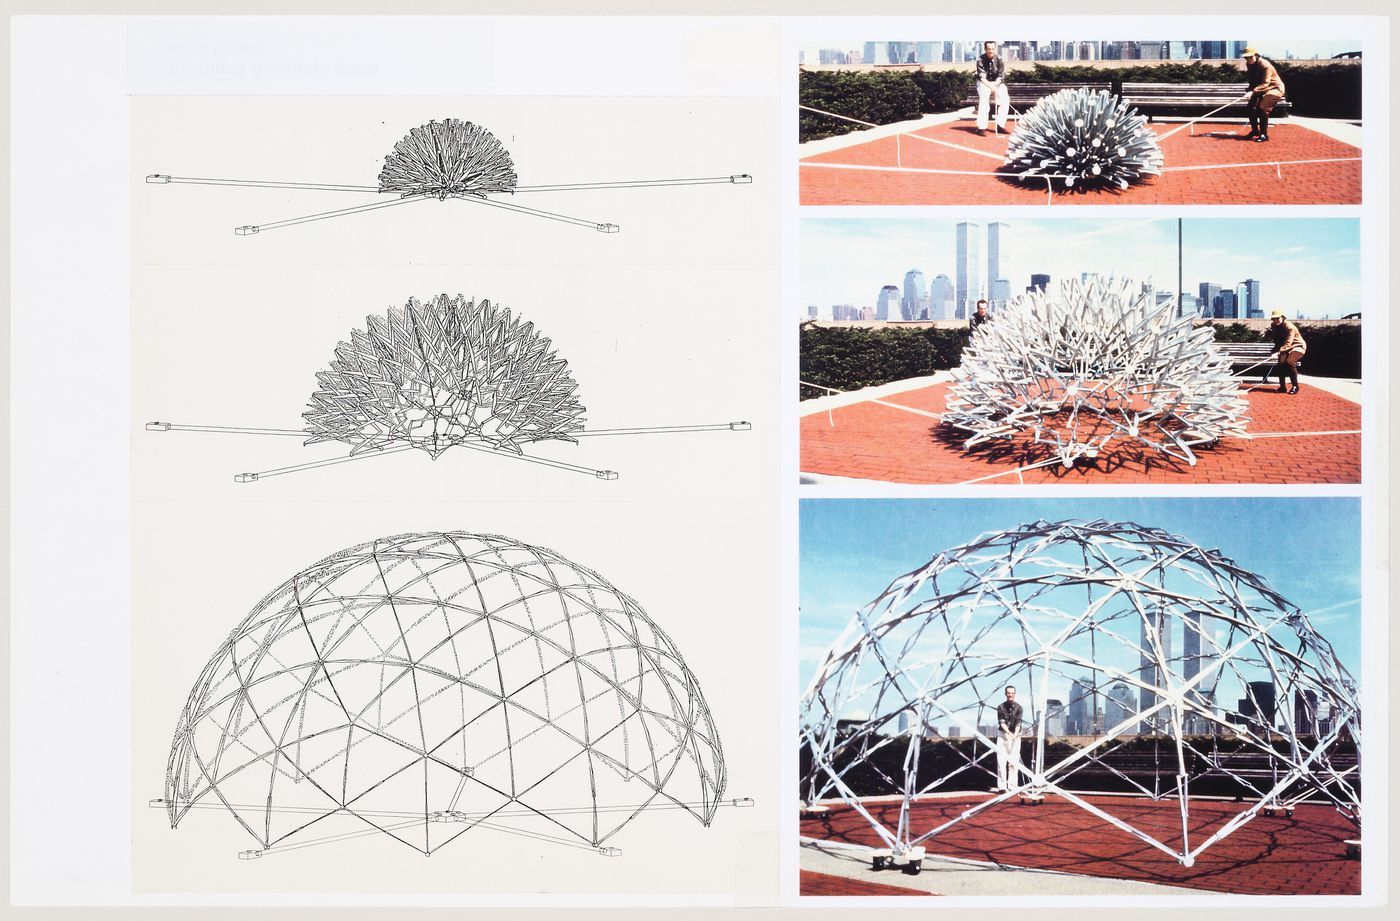 Expanding Geodesic Dome